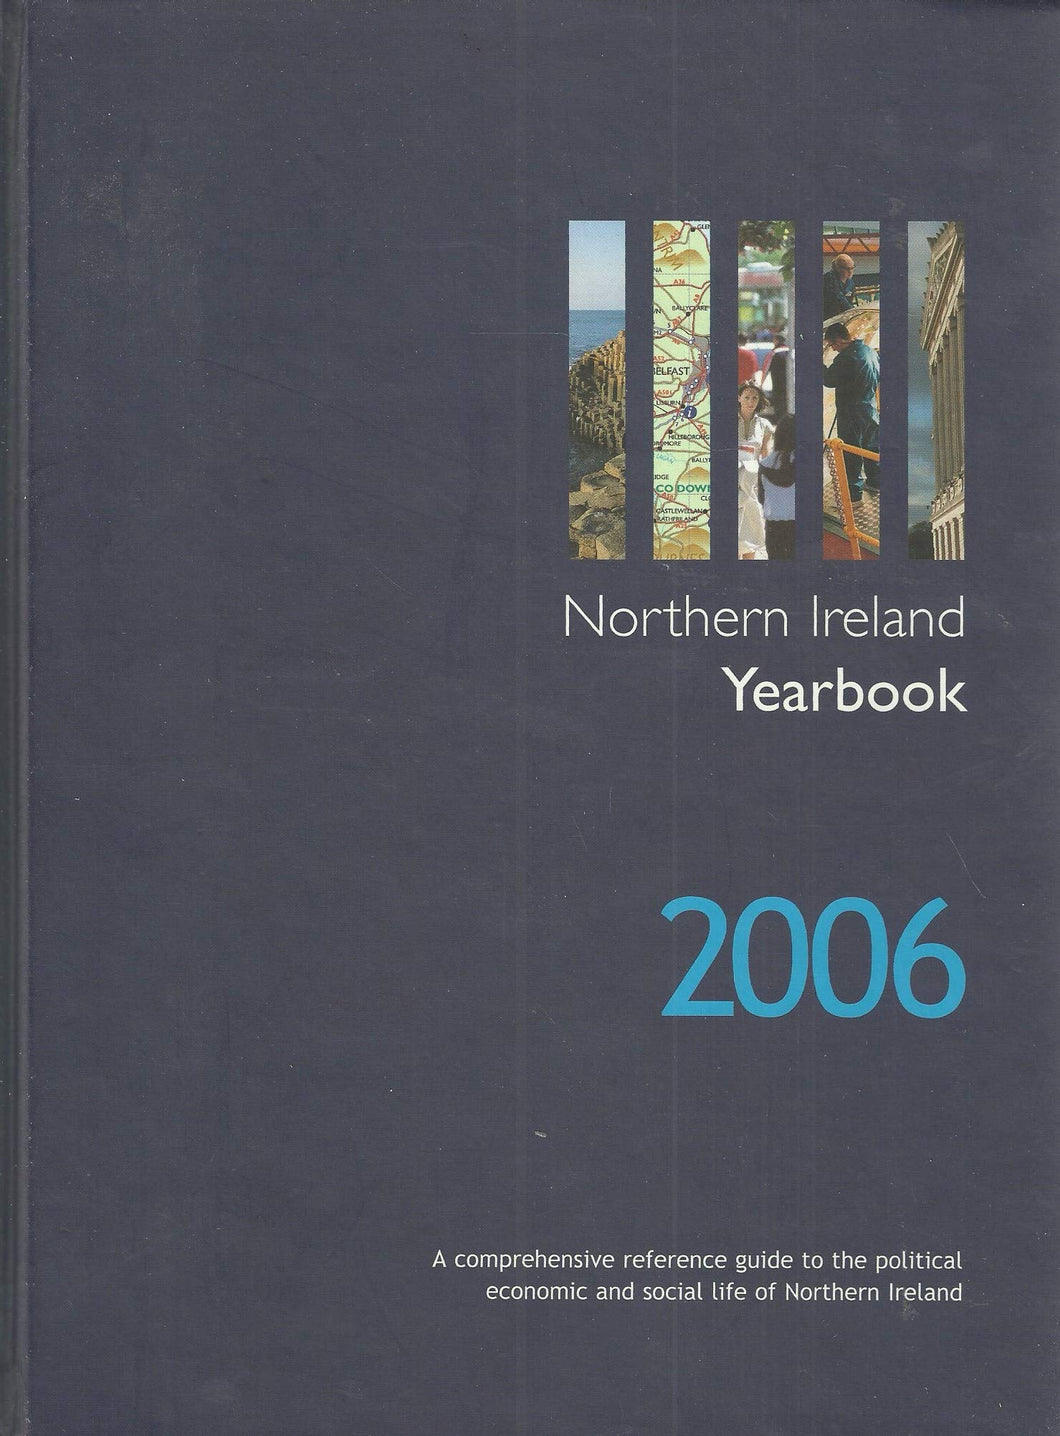 Northern Ireland Yearbook 2006: A Comprehensive Reference Guide to the Political, Economic and Social Life of Northern Ireland